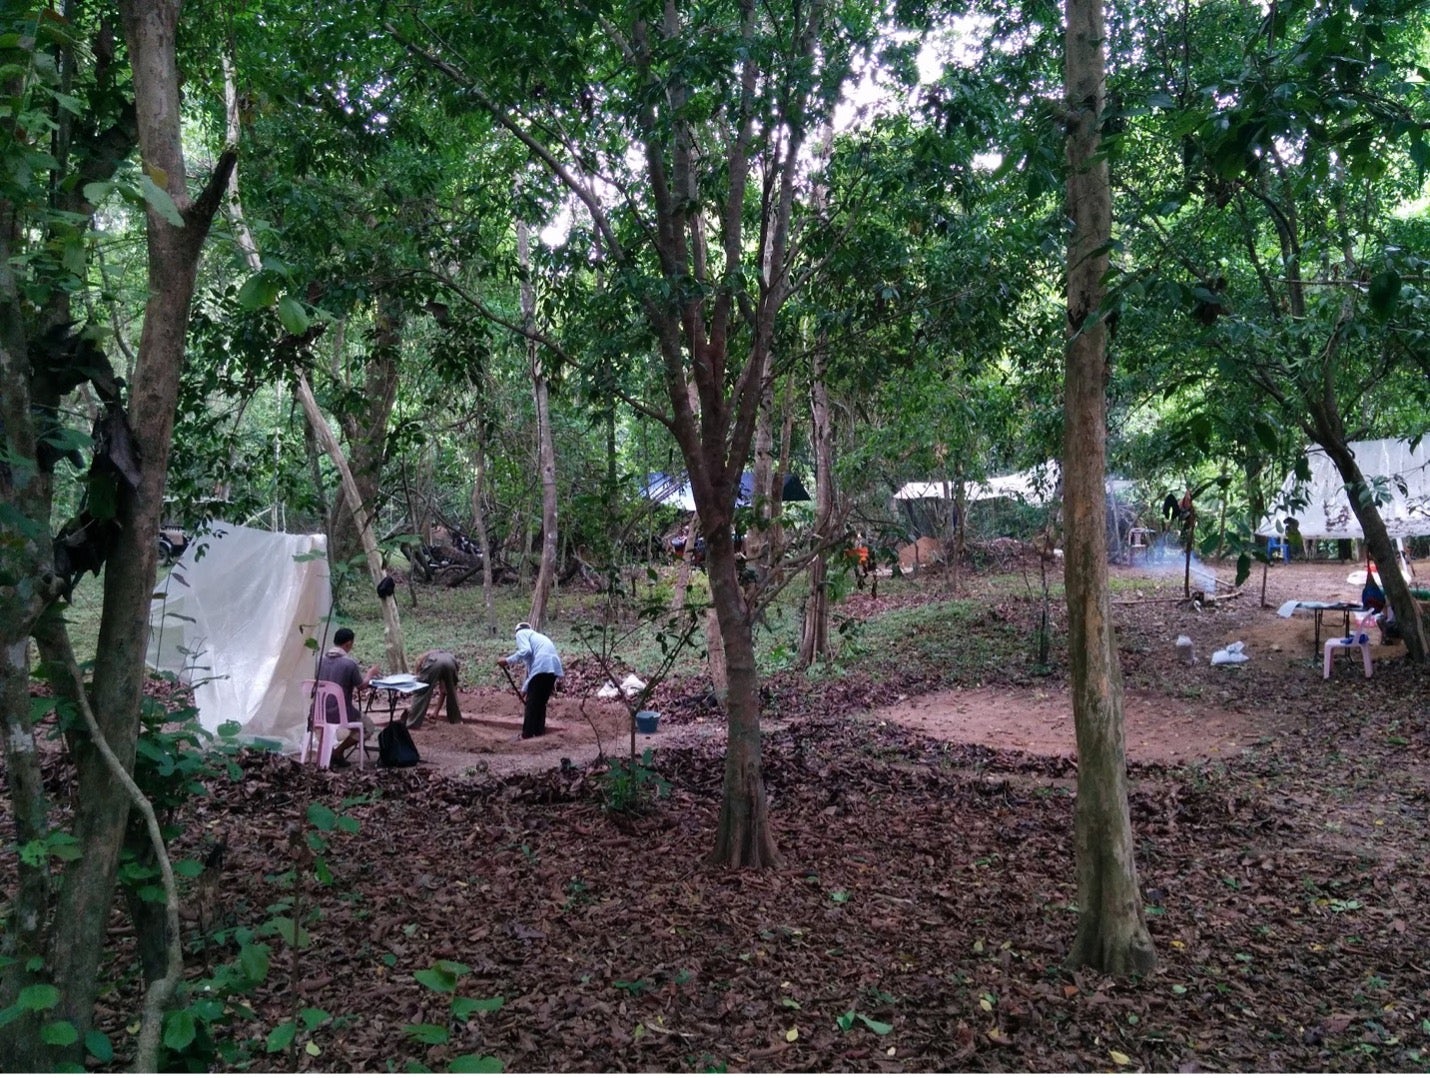 People excavate at an archaeological site under the trees.